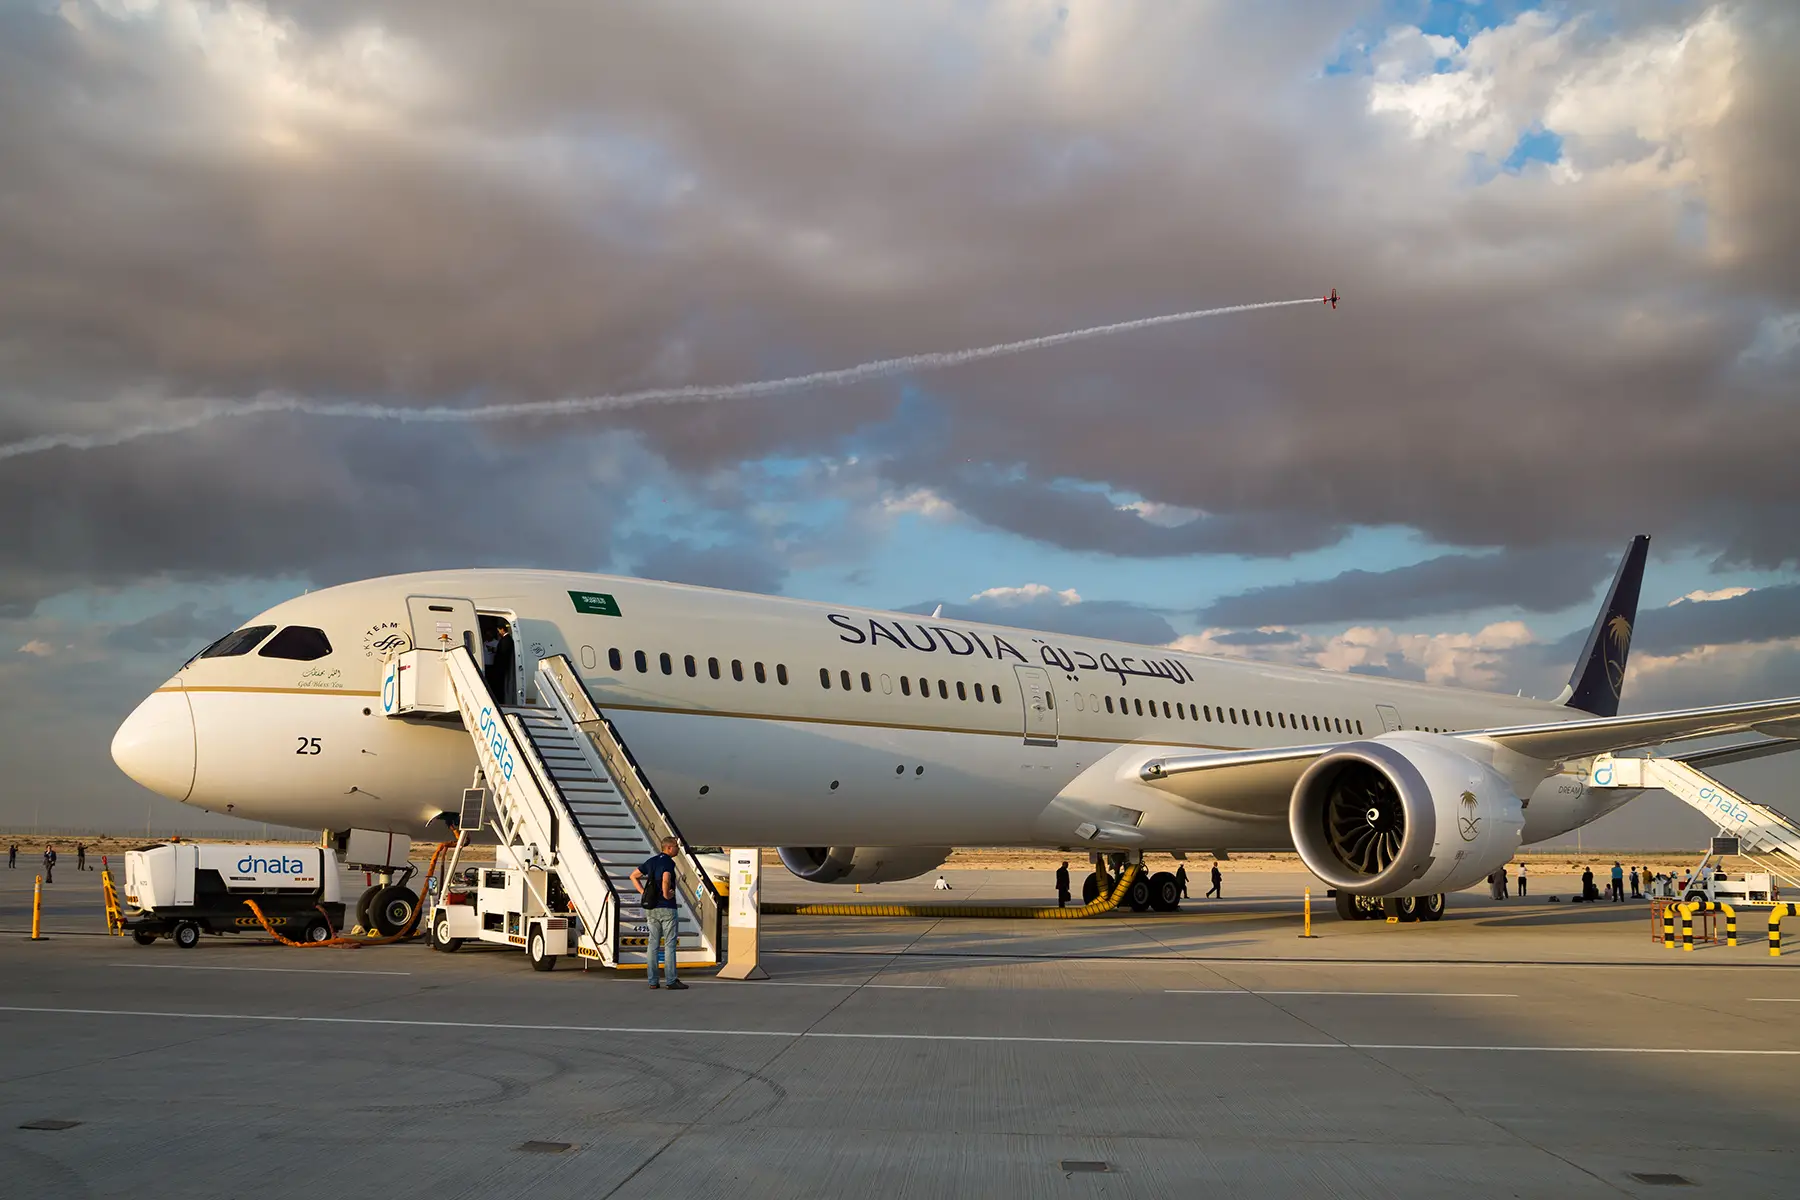 A Saudia Airlines jet